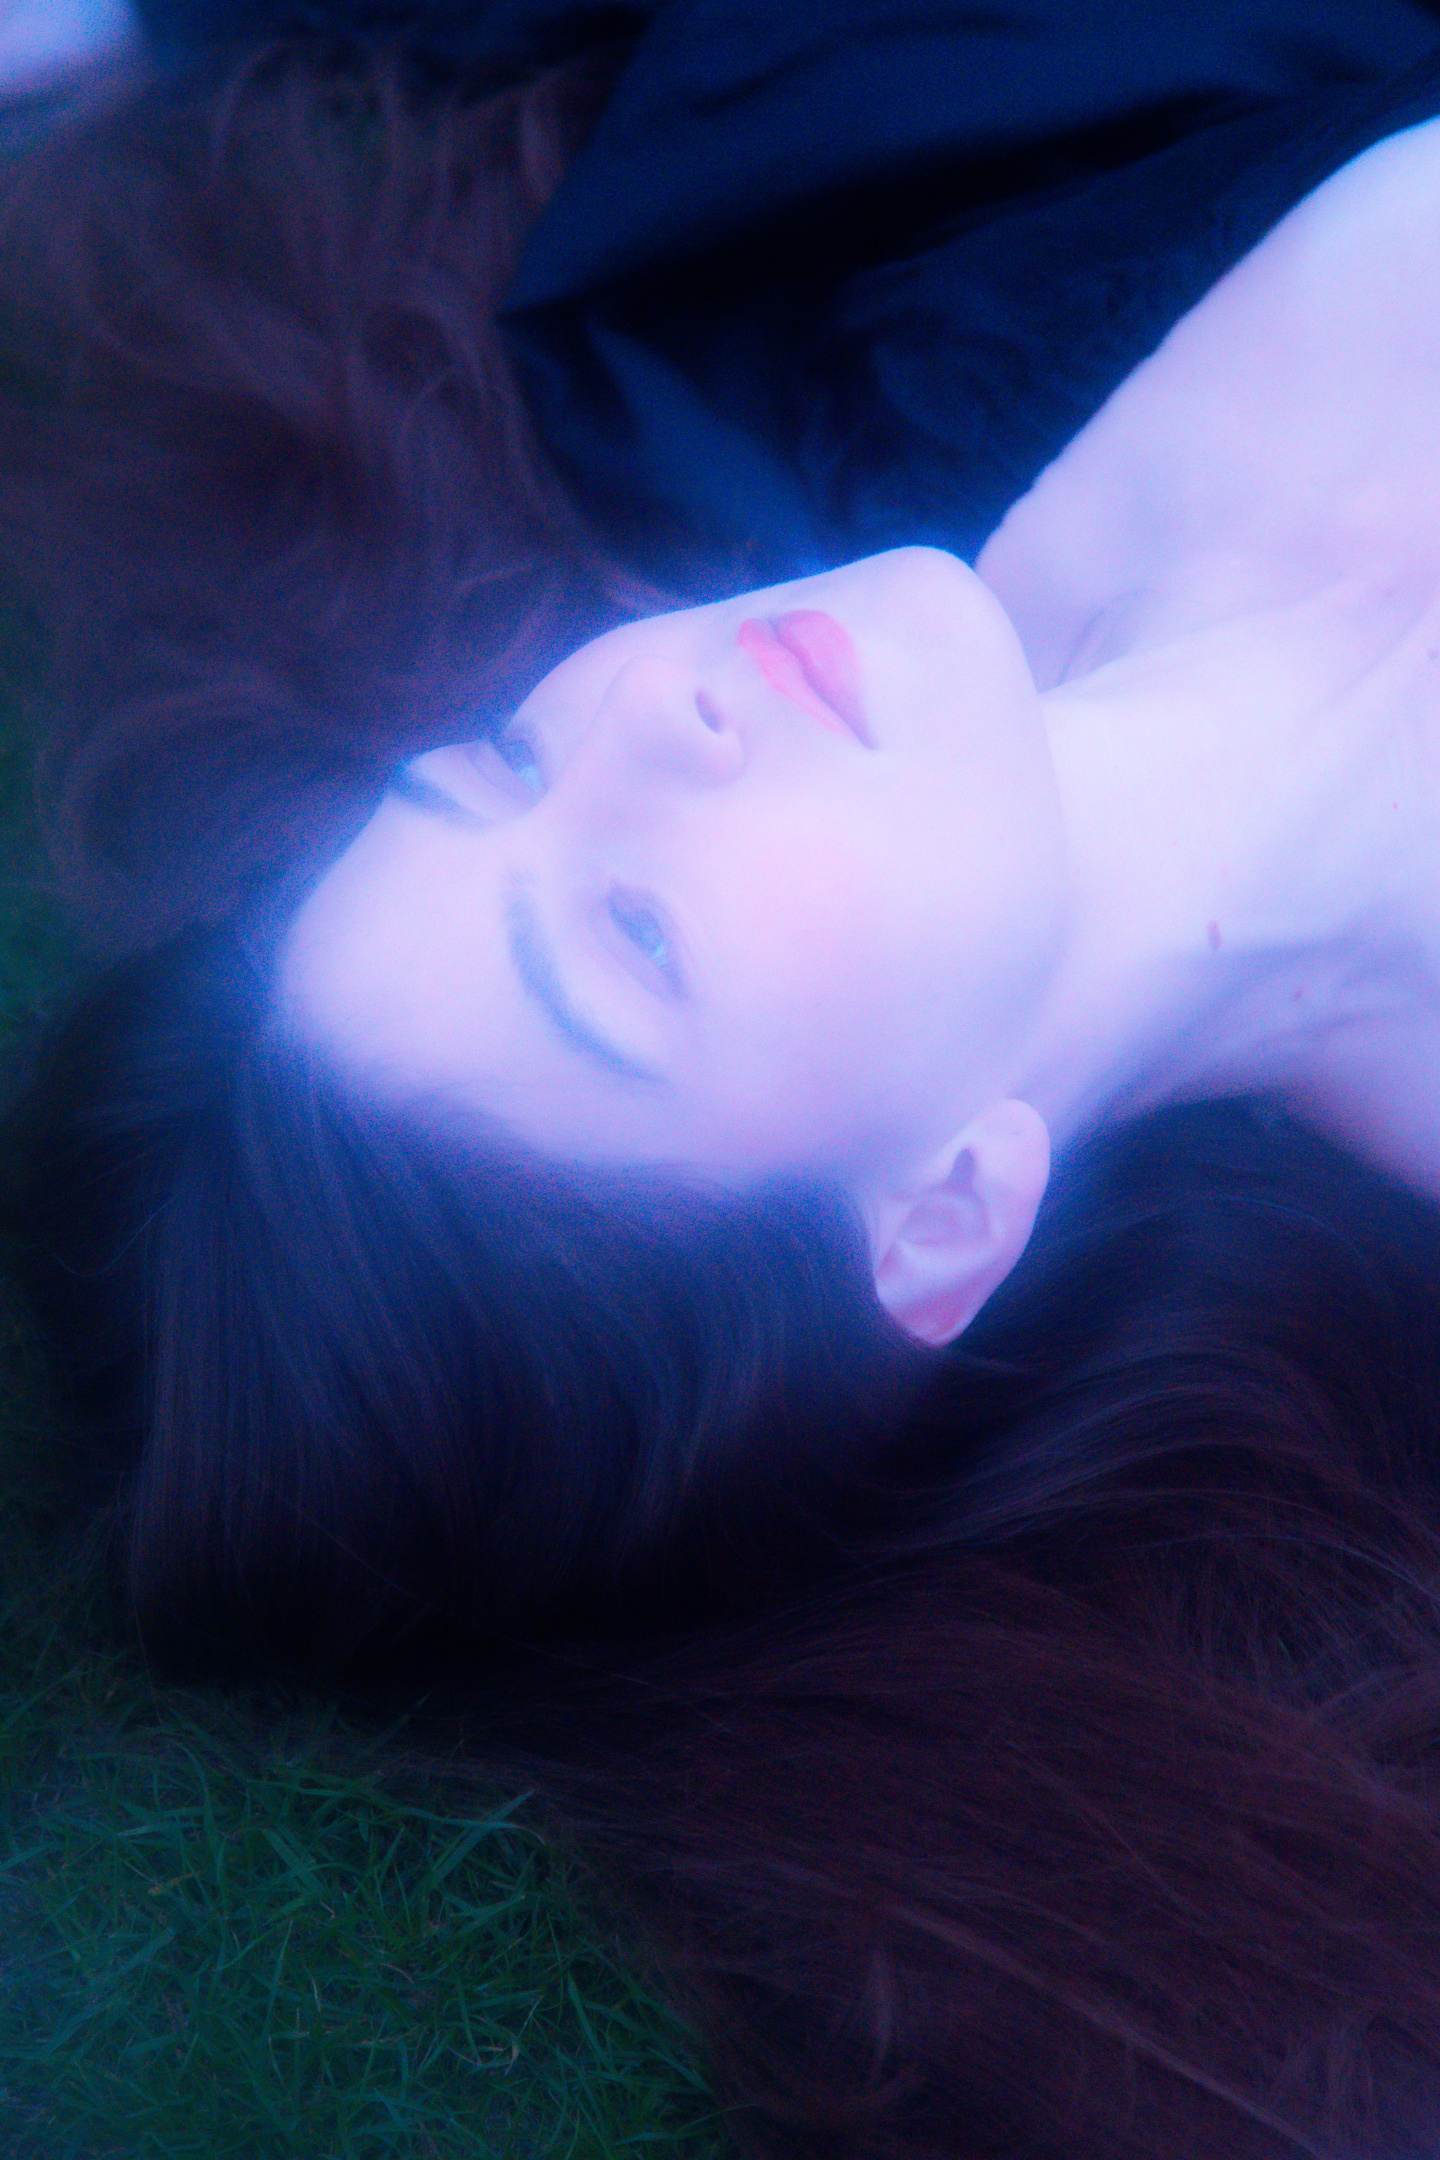 Weyes Blood’s search for the signal in the noise